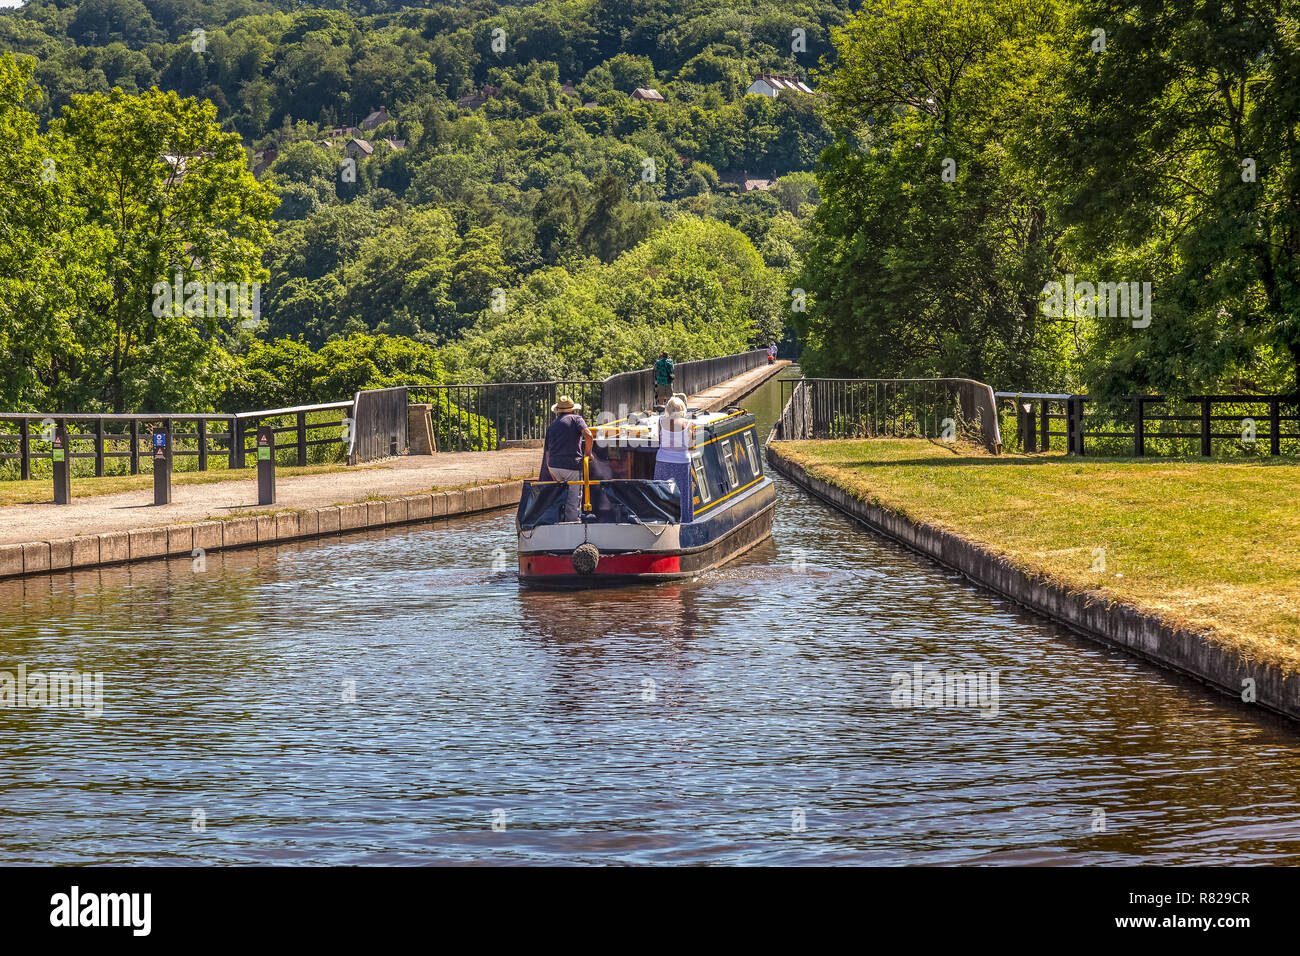 A barge, or Narrow Boat, crossing the Pontcysyllte Aqueduct near Llangollen in Wales.It carried the Llangollen canal across the River Dee. Stock Photo